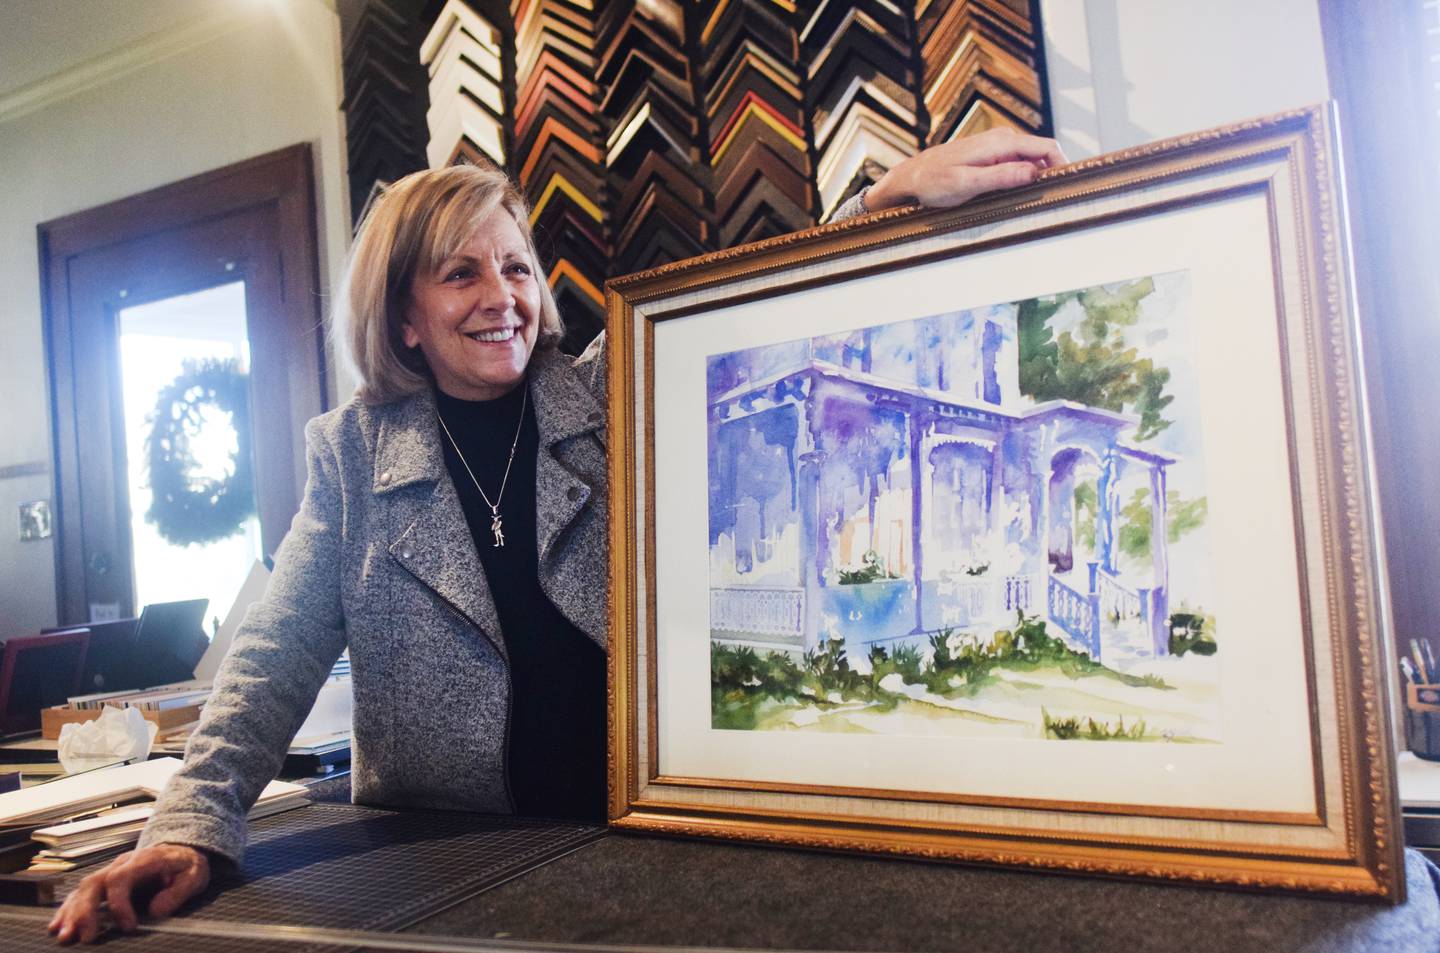 Pauli Zmolek Eades, owner of Cardinal Frame Shop, shows off one of her paintings framed in an ornate frame. The shop opened for business this past week to appointments, but it also welcomes walk-in traffic.